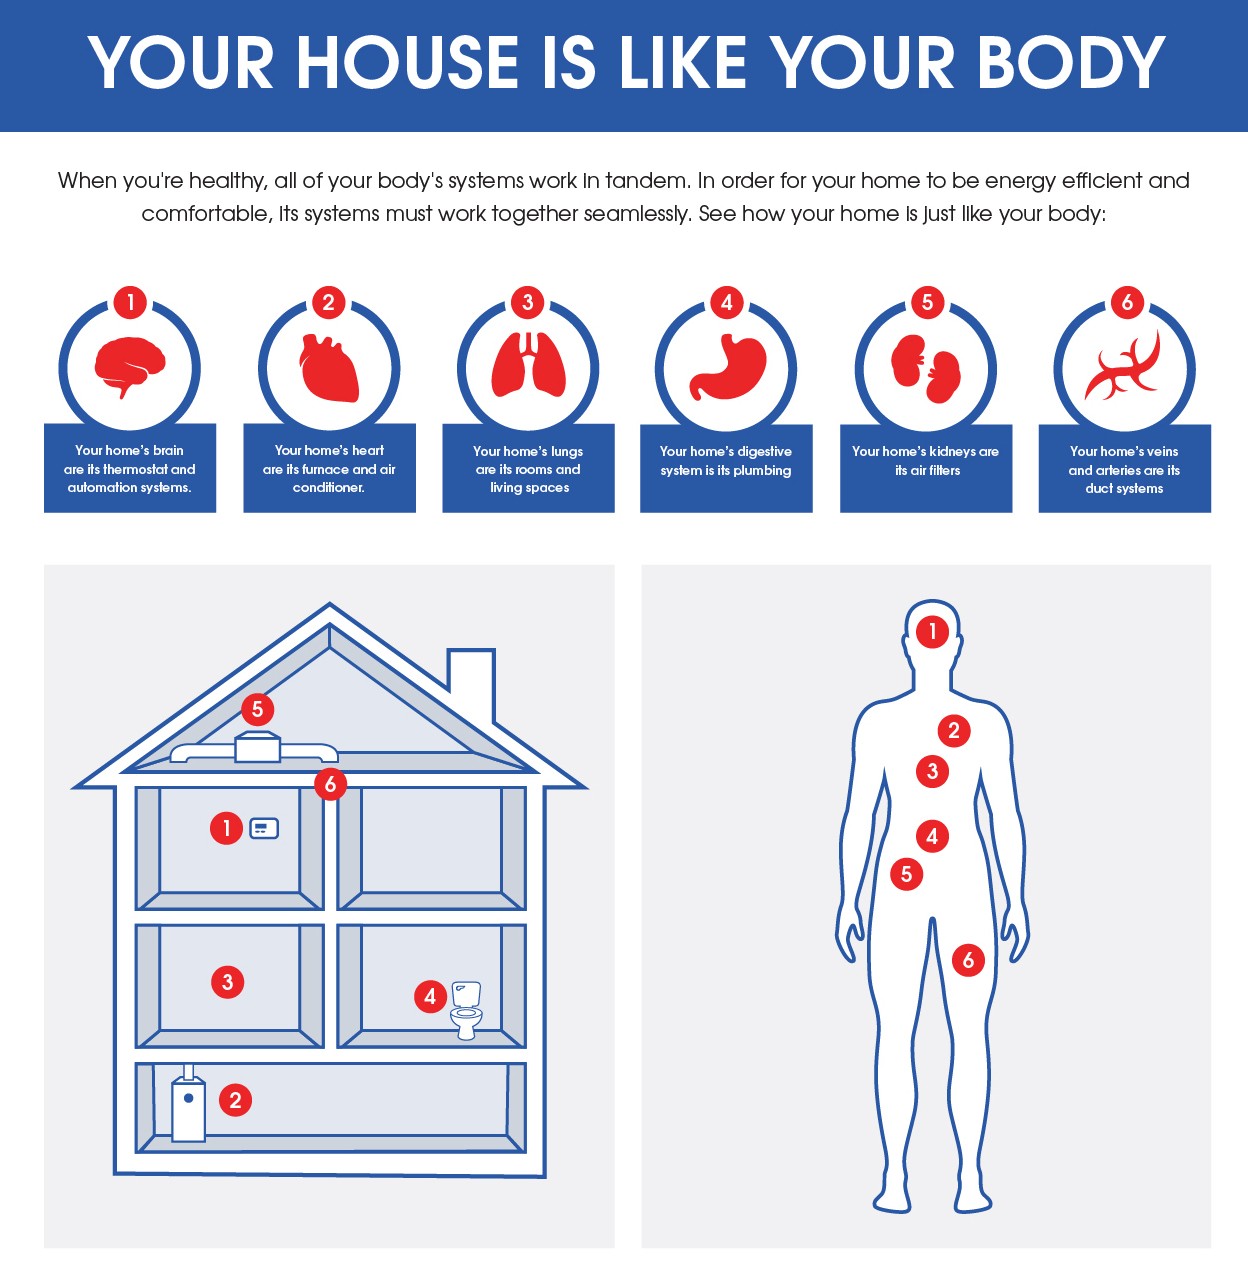 infographic comparing a home's systems to that of the human body